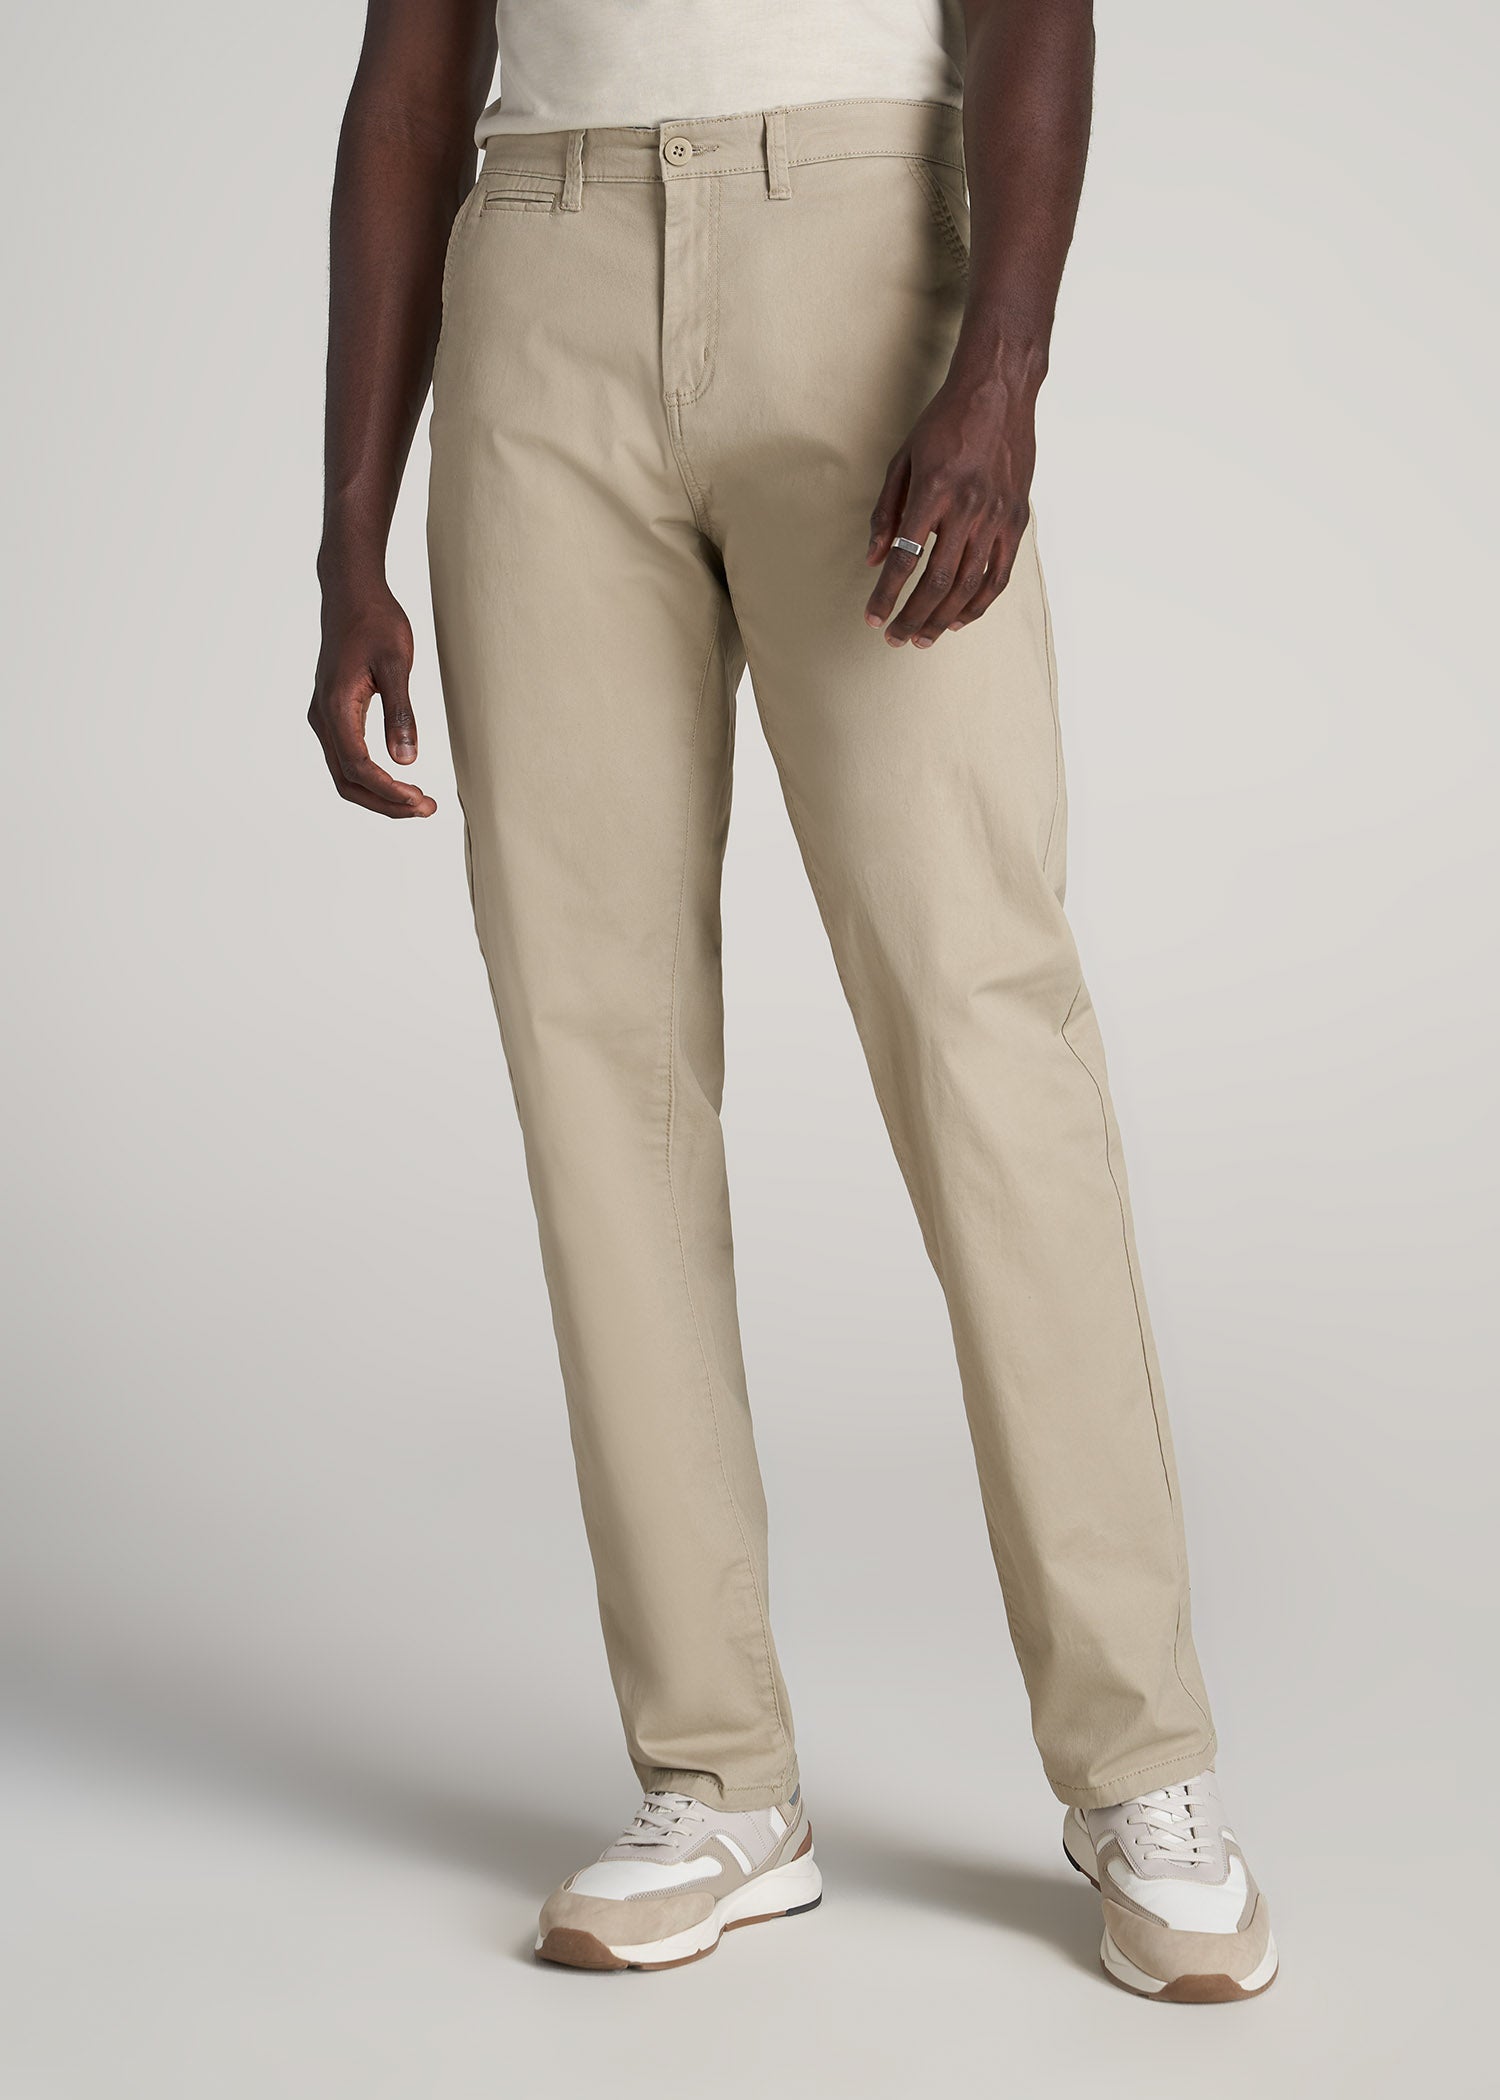 Blue Mountain Relaxed Fit Mid-Rise 5-Pocket Canvas Pants at Tractor Supply  Co.